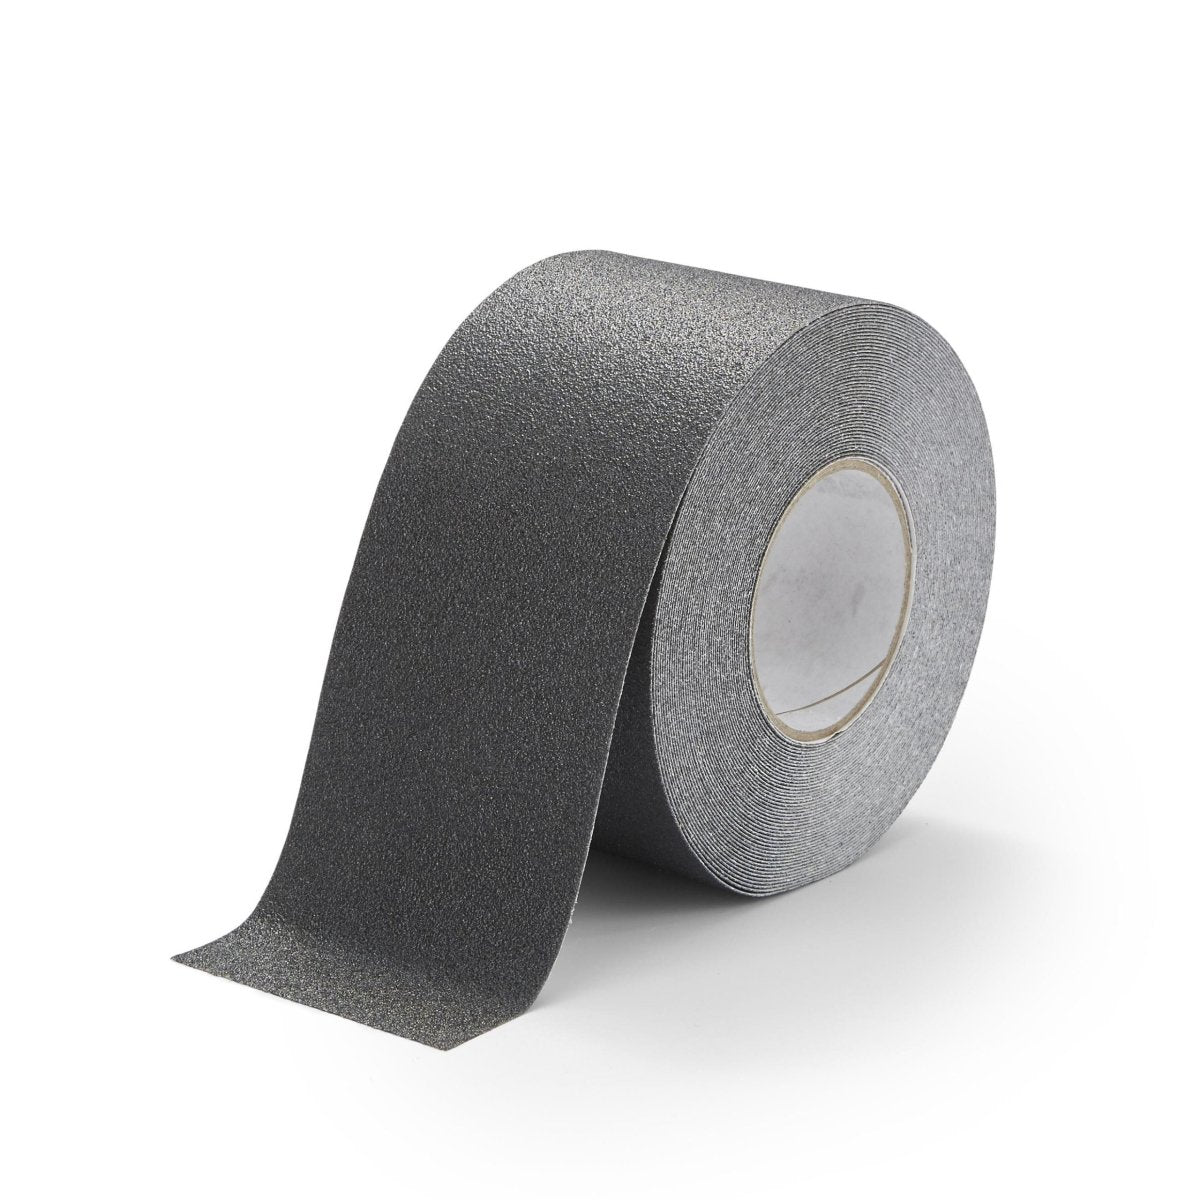 Chemical Resistant Safety-Grip Anti-Slip Tape - Black - Slips Away - H3447N-Black-Chemical-Resistant-Safety-Grip-100mm -